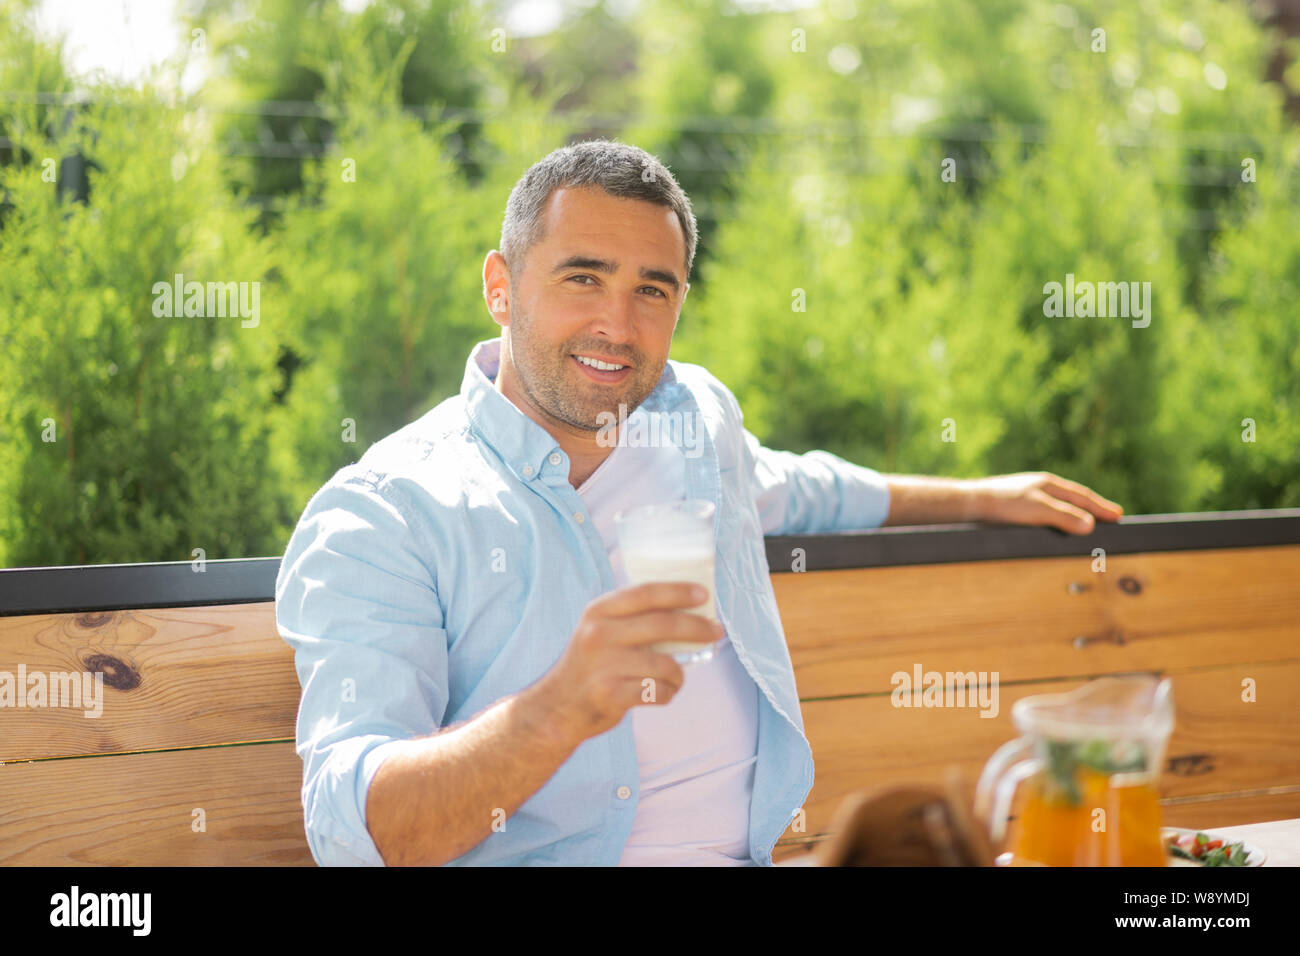 Handsome man smiling while having early meal outside Stock Photo